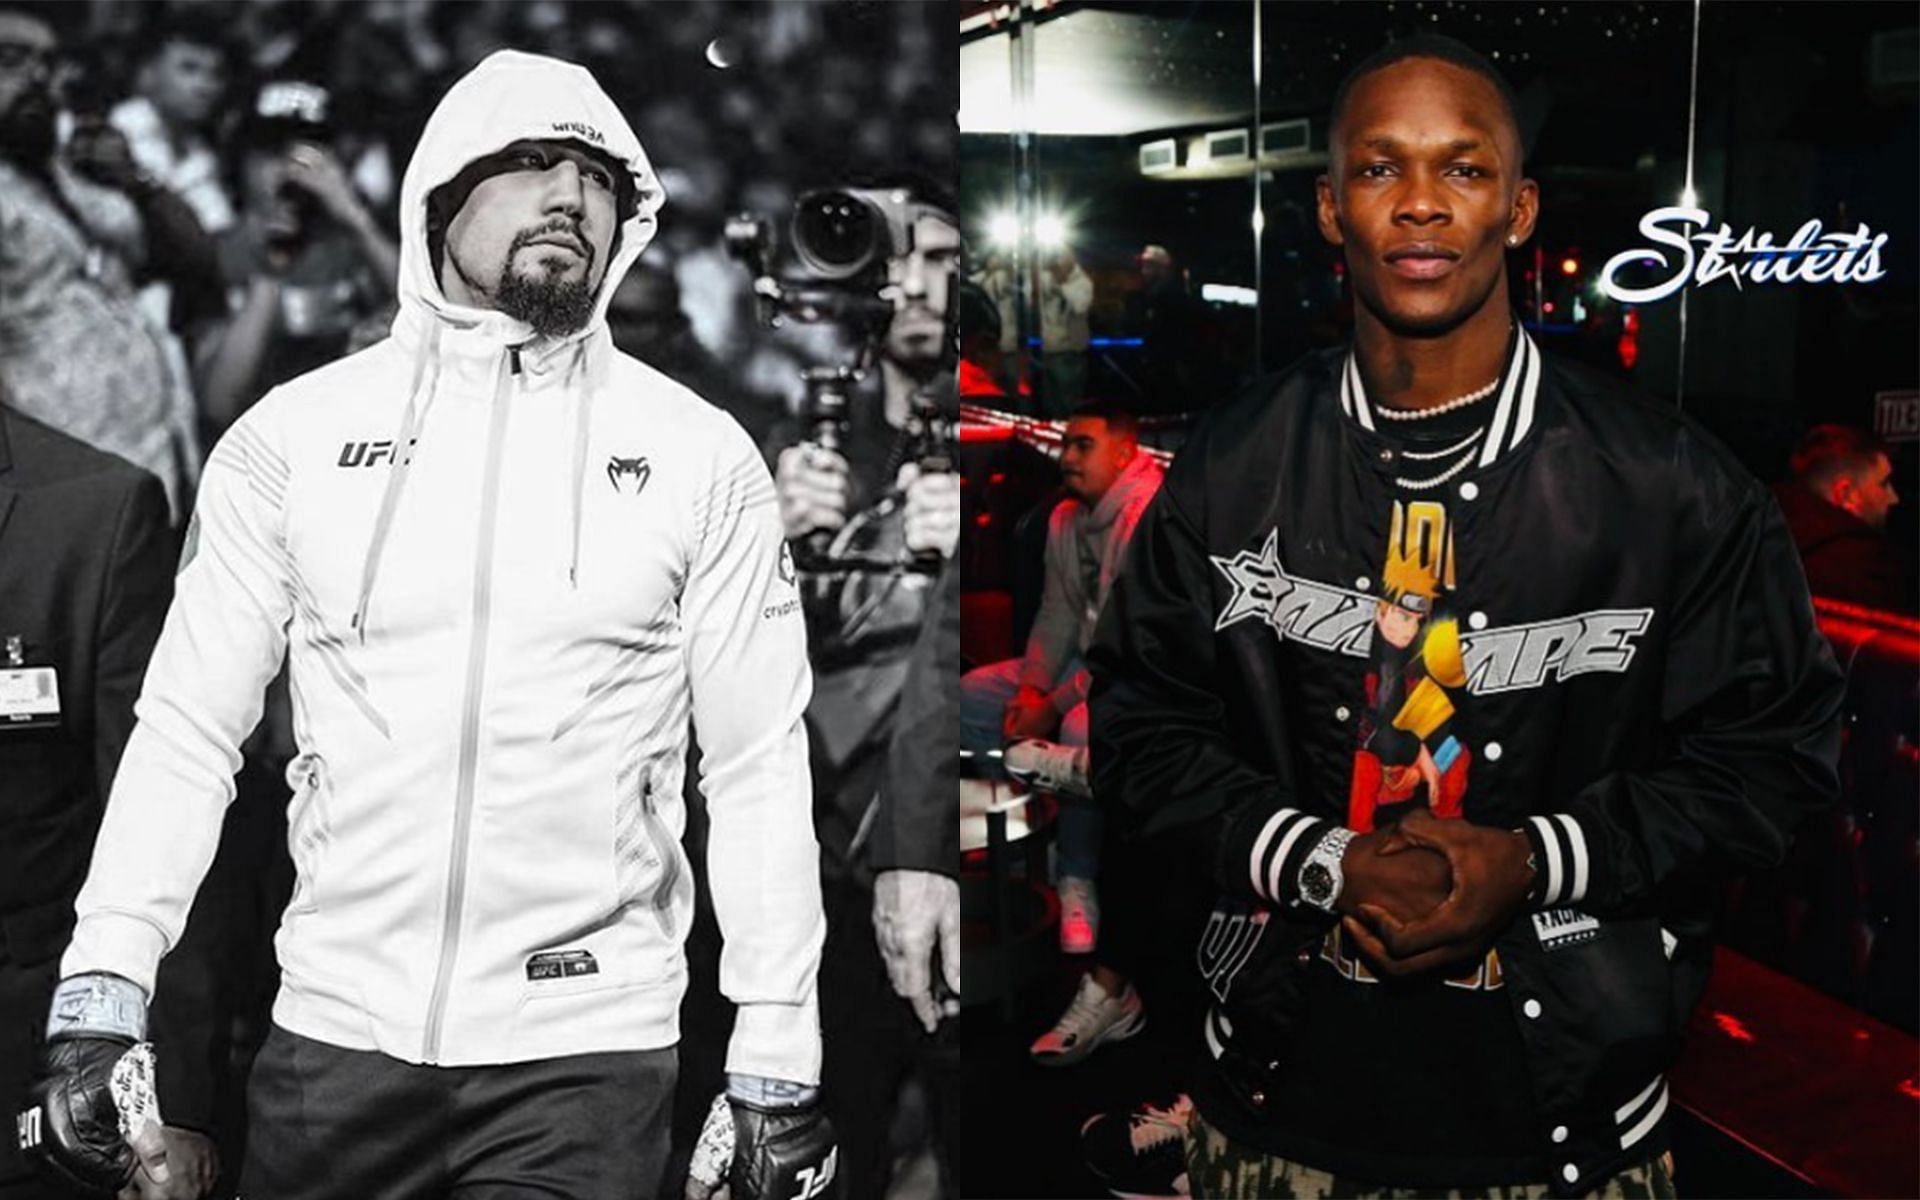 Robert Whittaker (left) is not ruling out a trilogy fight against Israel Adesanya (right) [Images Courtesy: @robwhittakermma and @stylebender Instagram]